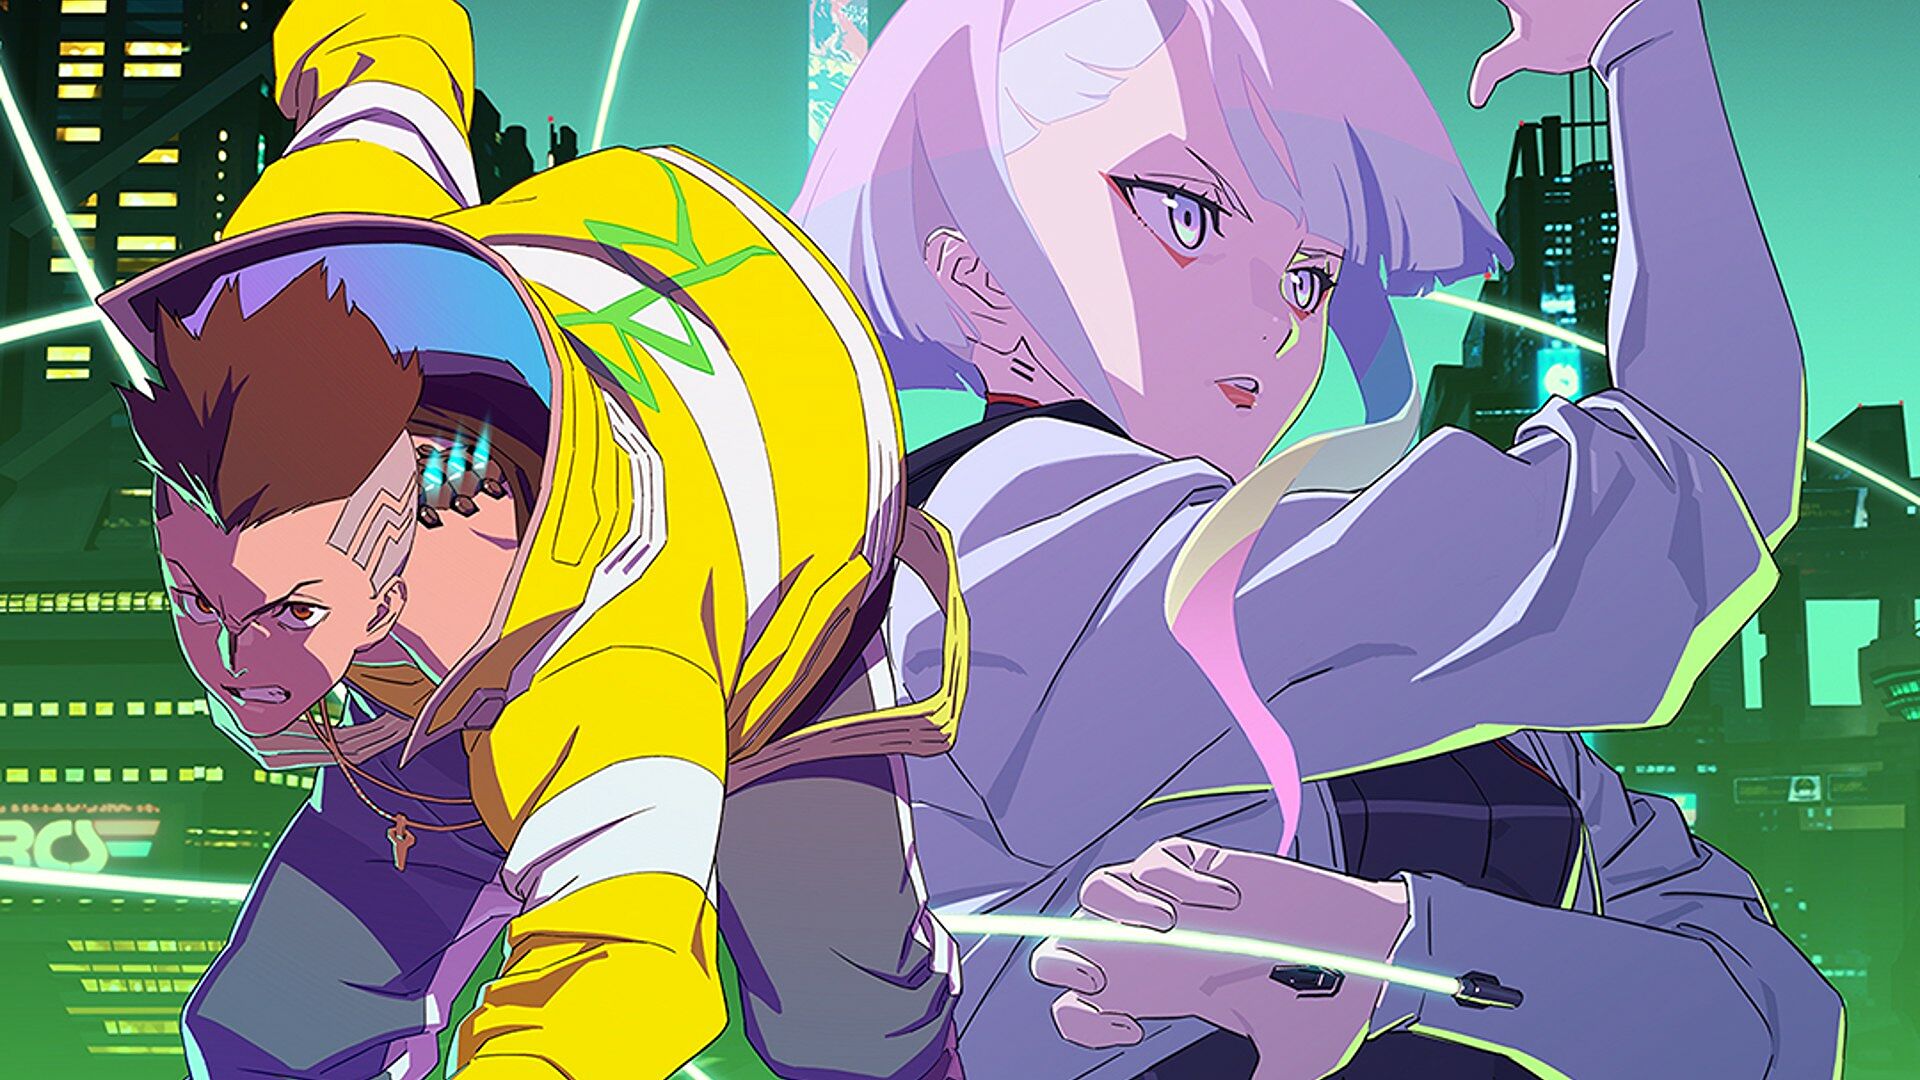 If You Liked Cyberpunk: Edgerunners, You Need To Watch These Studio Trigger  Anime Series - Geek Parade